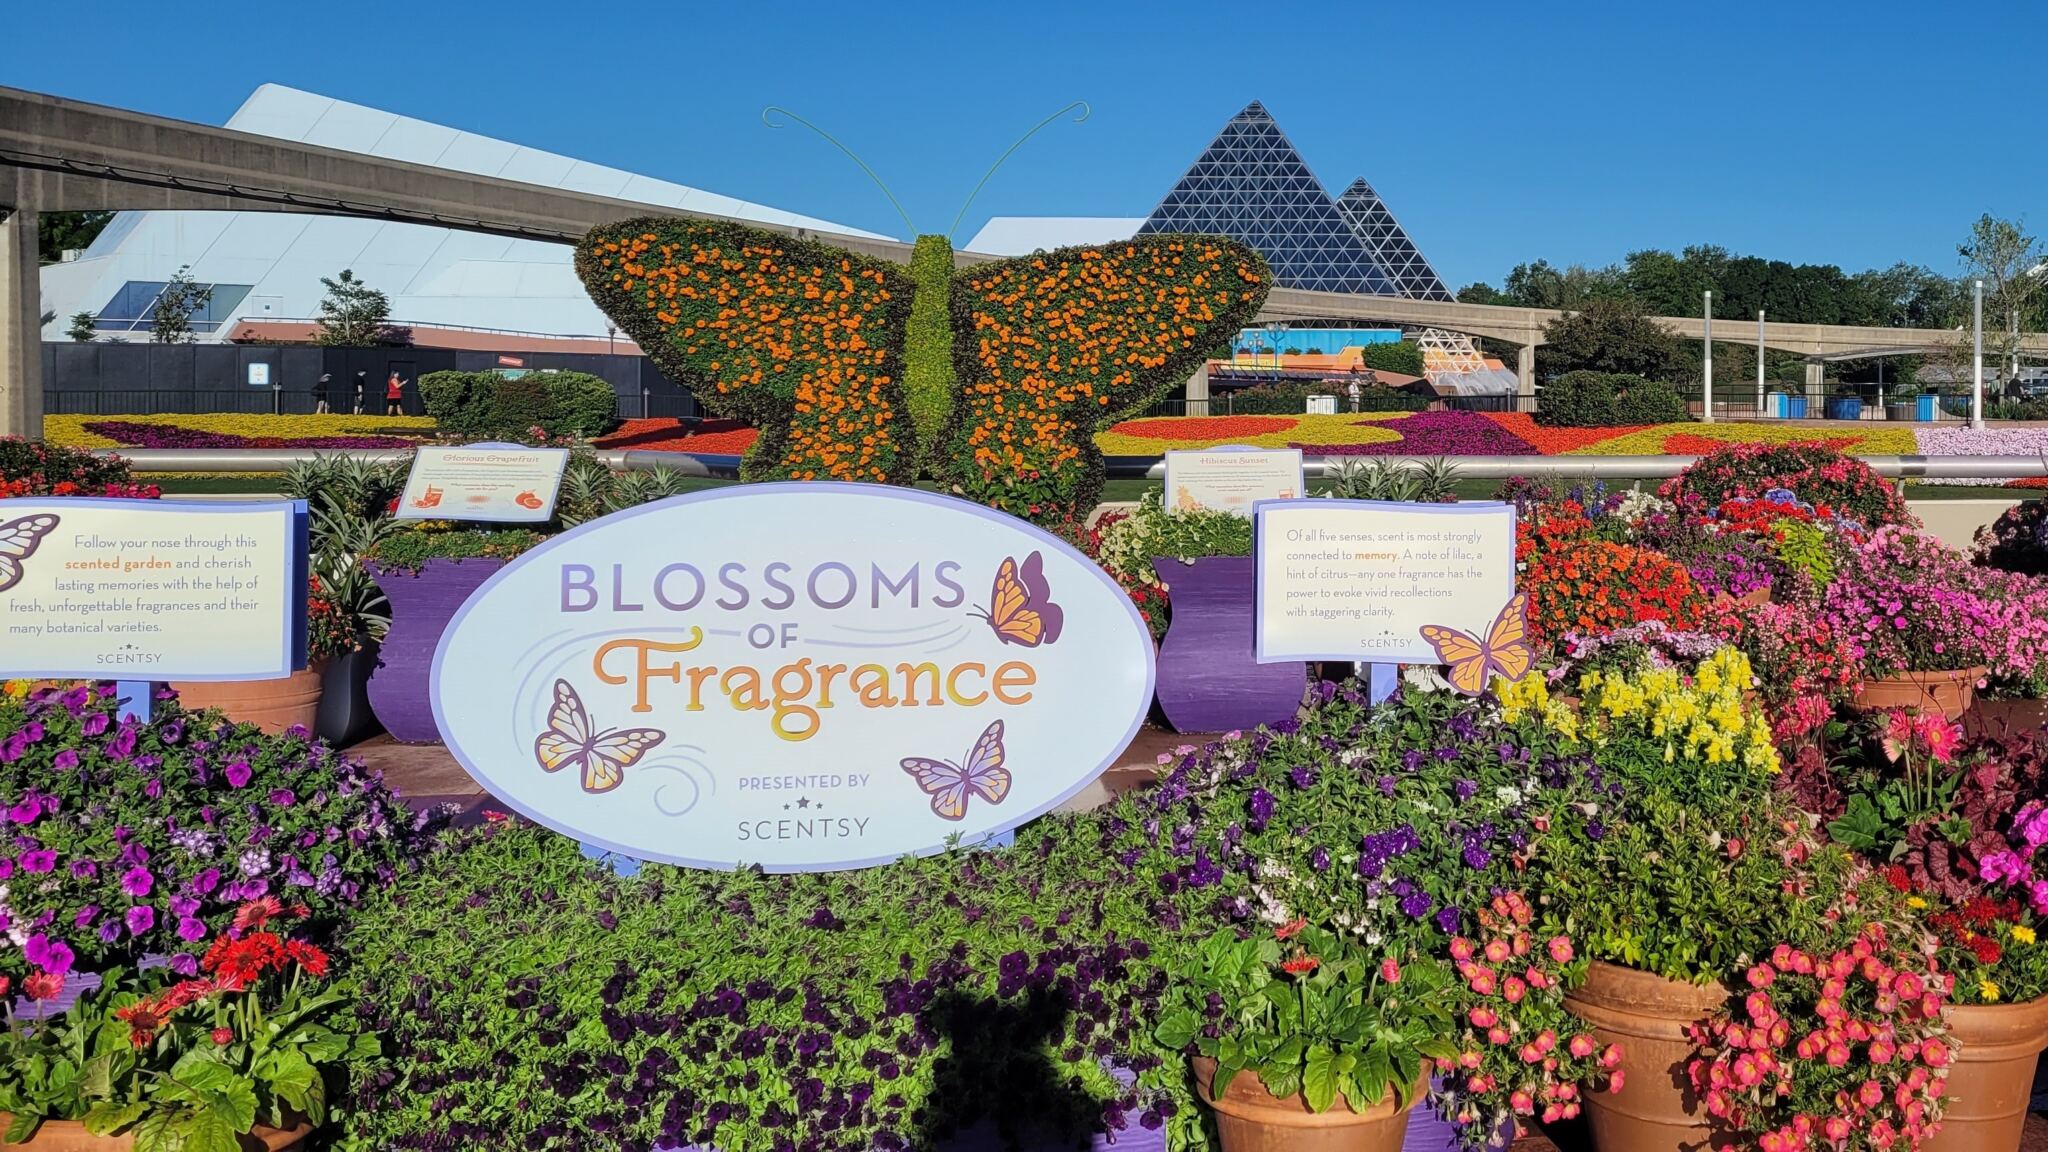 Blossoms of Fragrance Presented by Scentsy